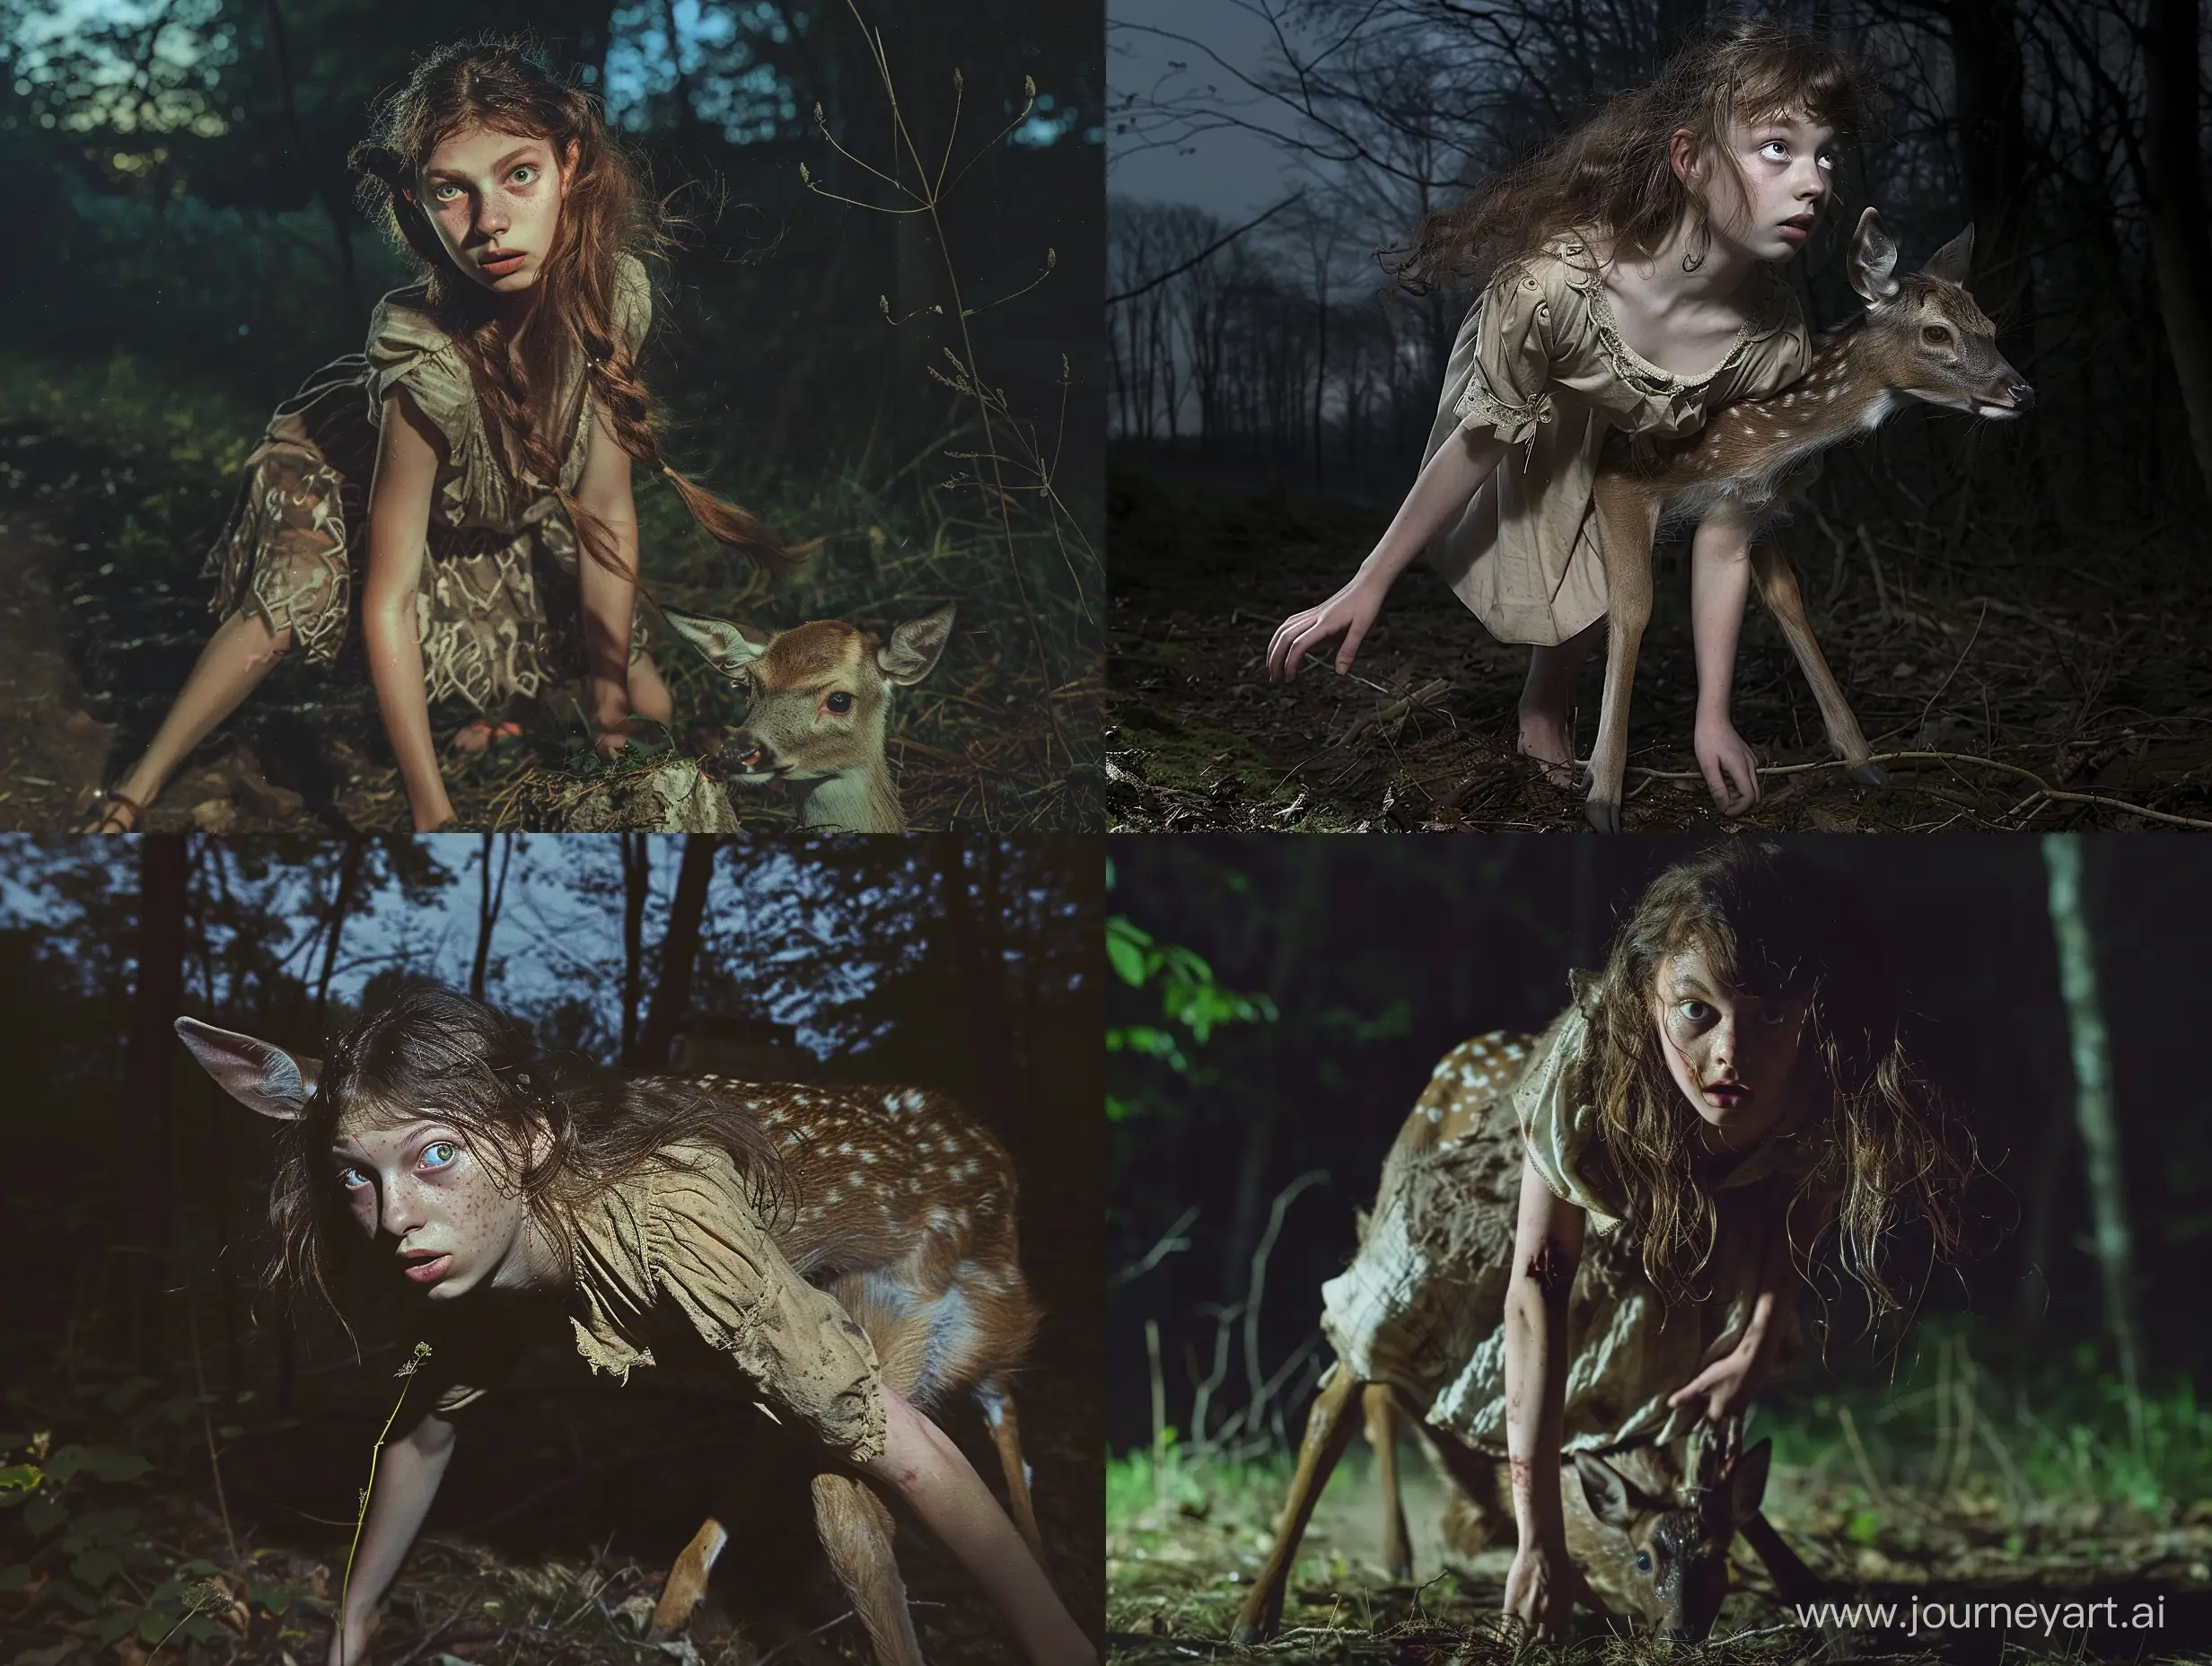 Medieval-Maid-Transformed-into-a-Deer-in-Enchanted-Night-Forest